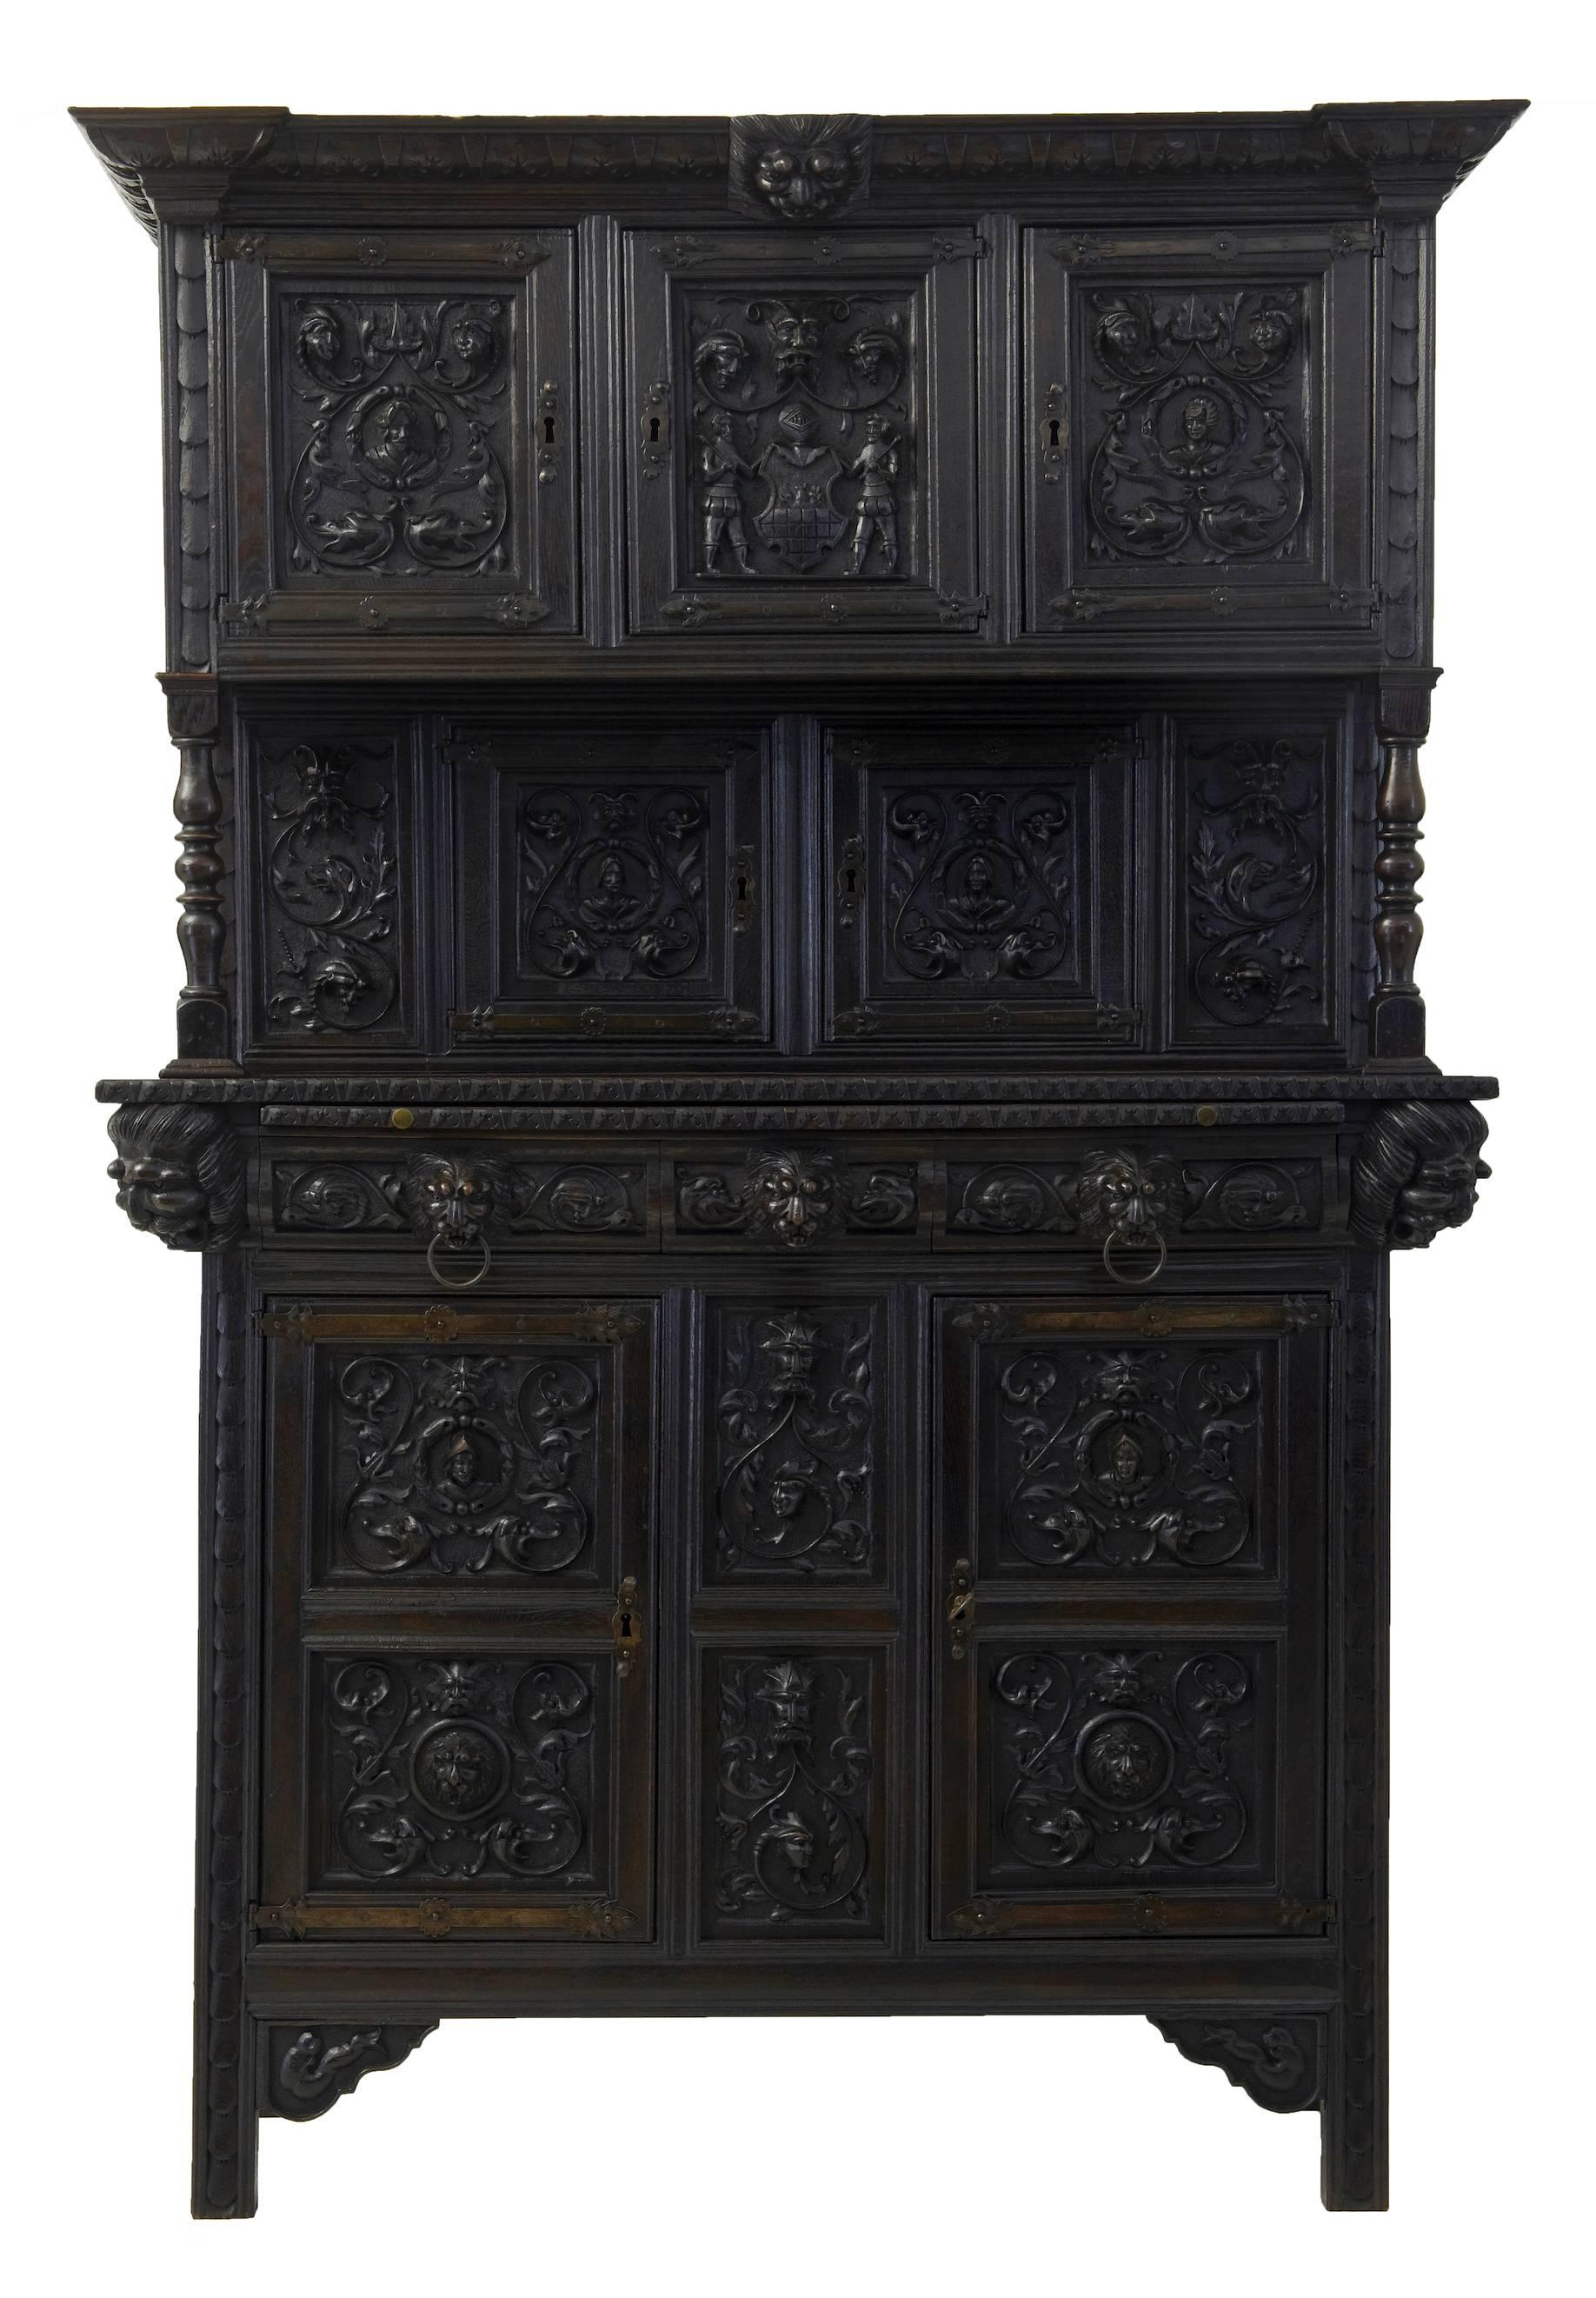 Imposing french Gothic influenced cupboard circa 1830.
3 tiers comprising of 2 sections. 3 carved panel doors over a double door cupboard with turned supports, bottom section with brushing slide, 2 drawers and cupboard with shelf.
Dark oak